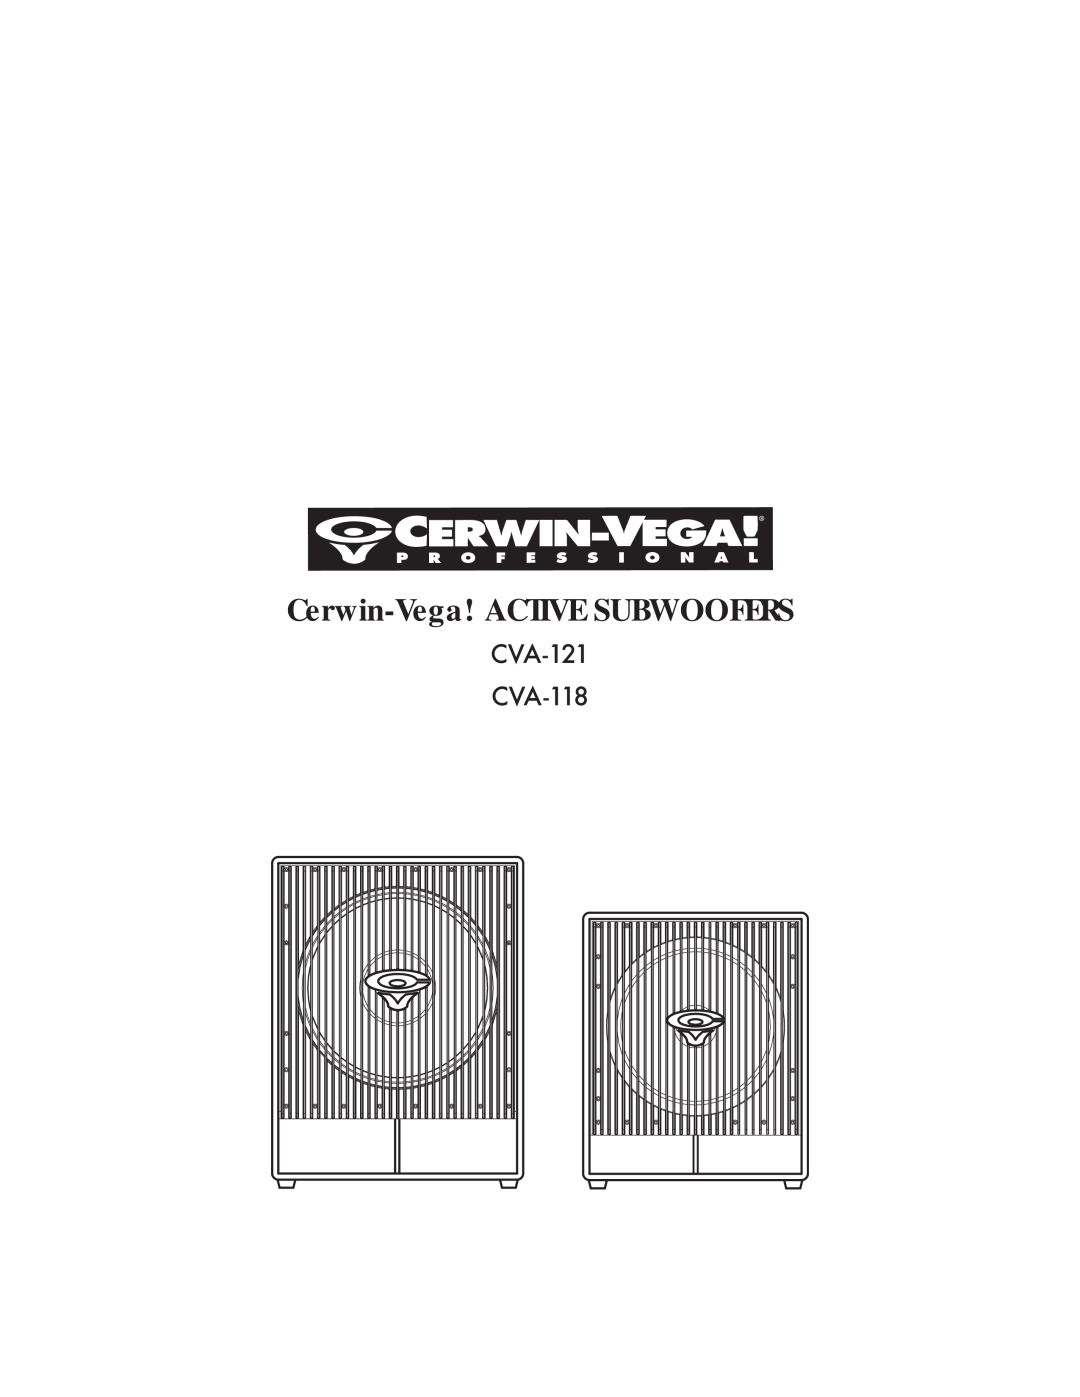 Cerwin-Vega specifications Cerwin-Vega, The Details, Specifications, CVA-121Active Subwoofer, The Loud Speaker Company 